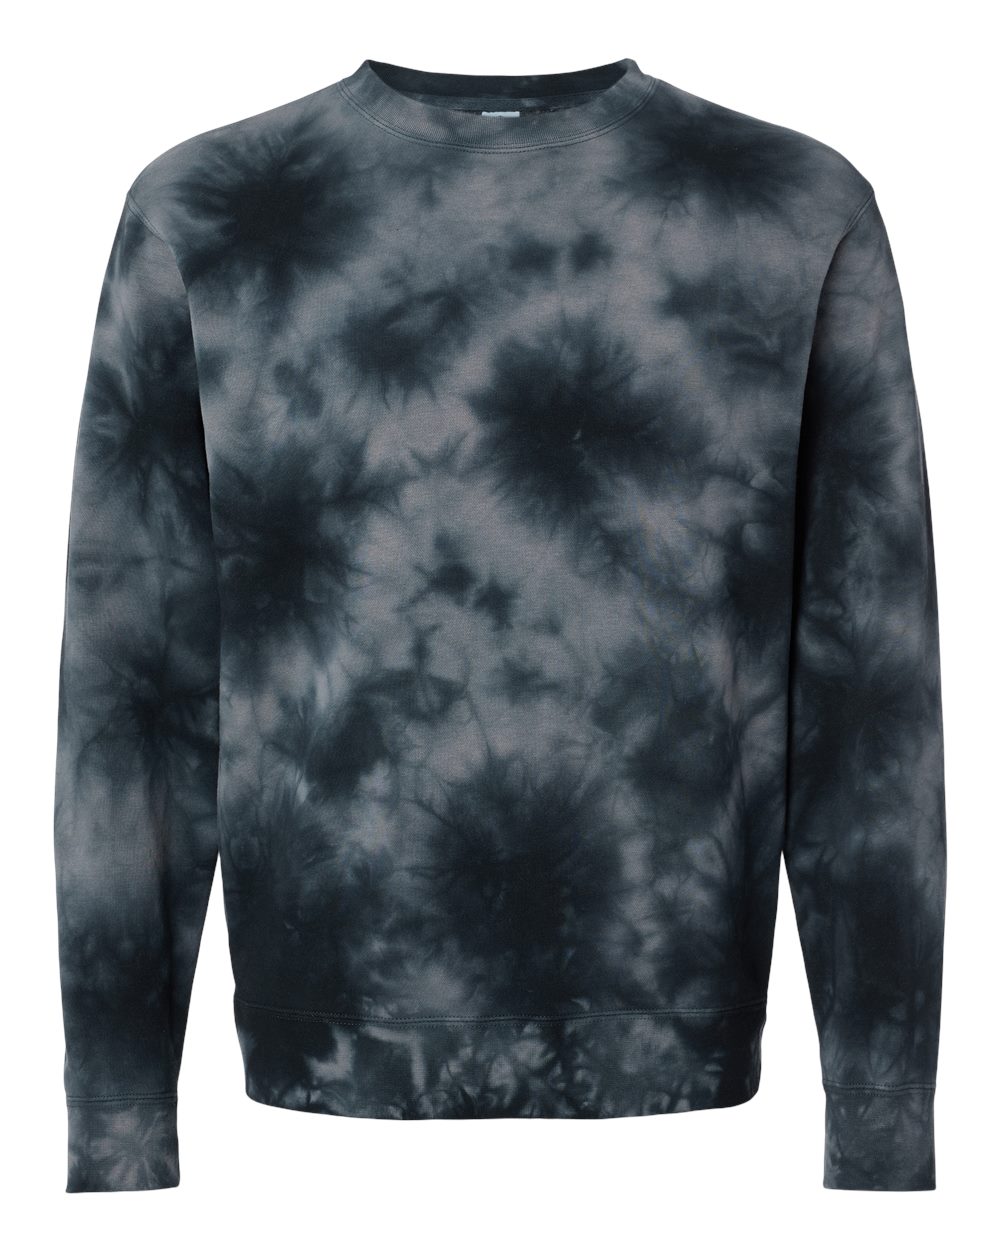 Independent Trading Co. - PRM3500TD Unisex Midweight Tie Dyed Crew